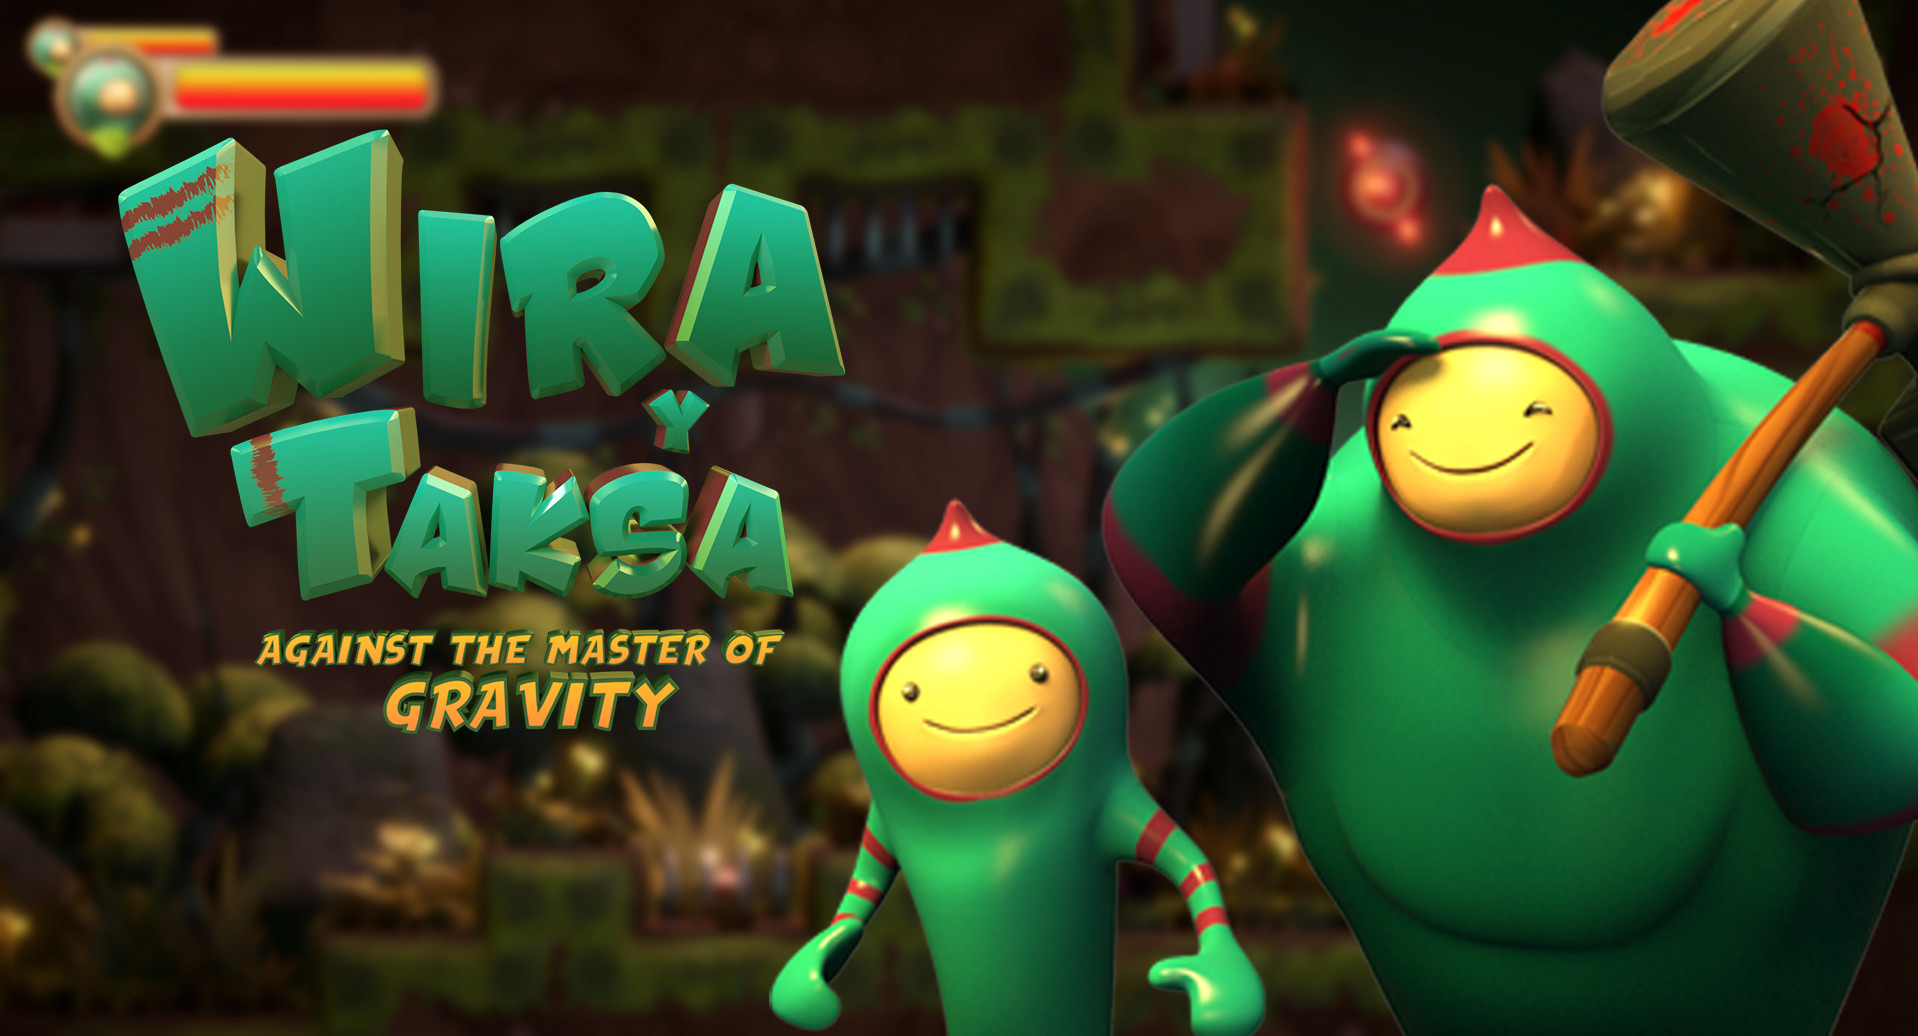 Wira & Taksa: Against the Master of Gravity on Steam